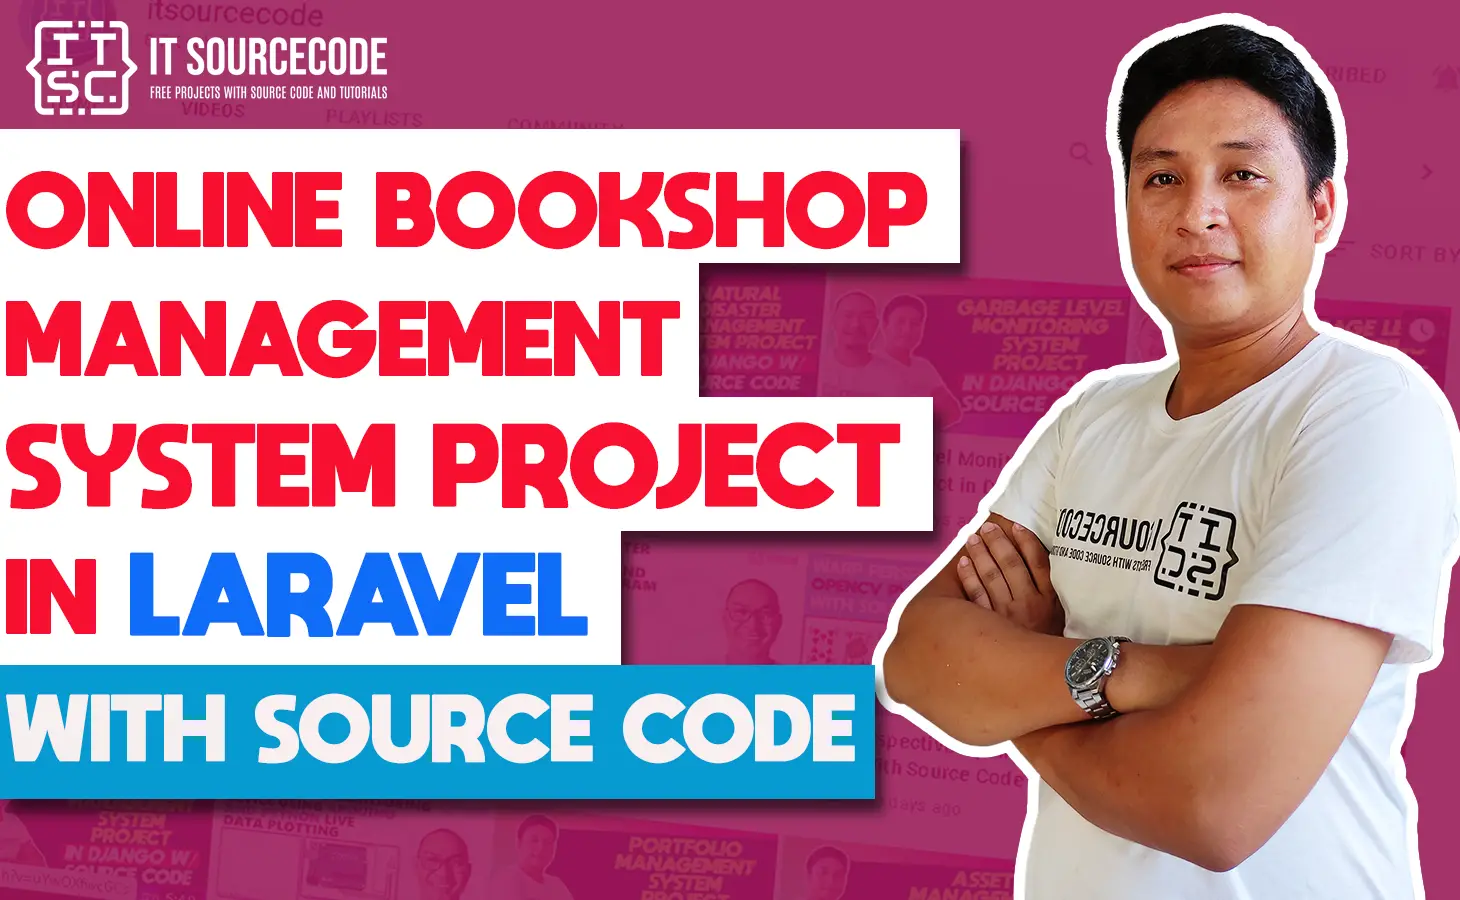 Online Bookshop Management System Project in Laravel with Source Code